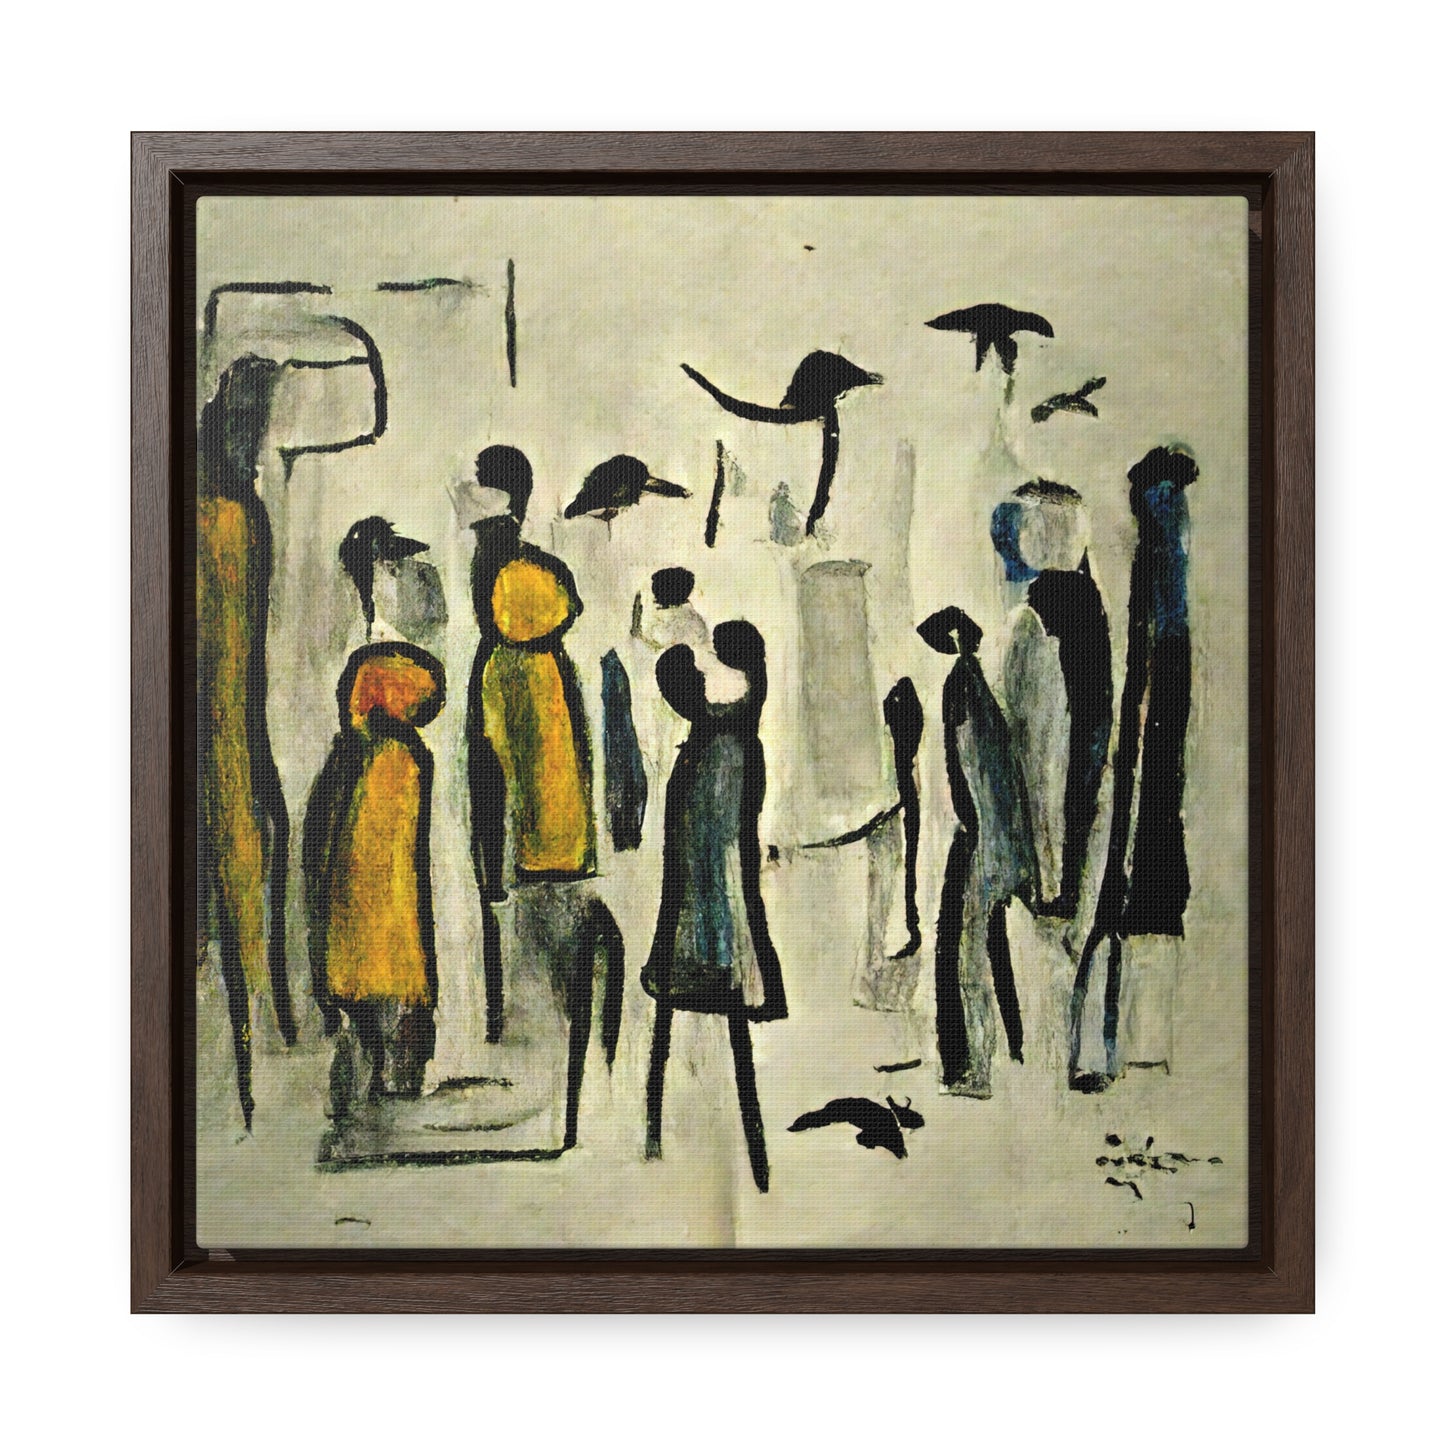 People and Birds 3, Valentinii, Gallery Canvas Wraps, Square Frame